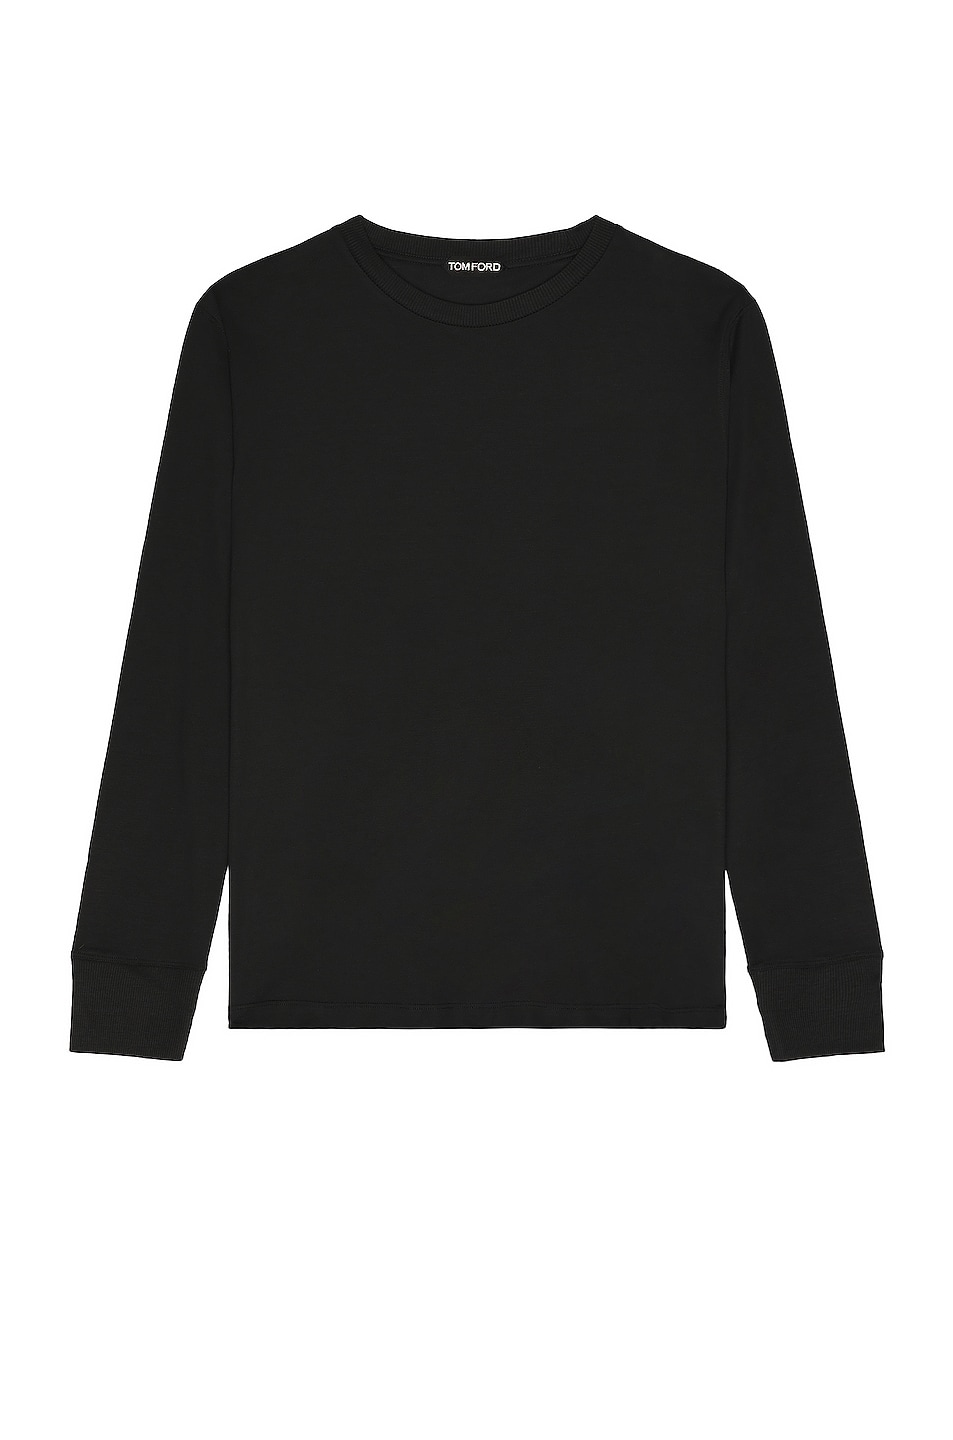 Image 1 of TOM FORD Long Sleeve T-Shirt in Black